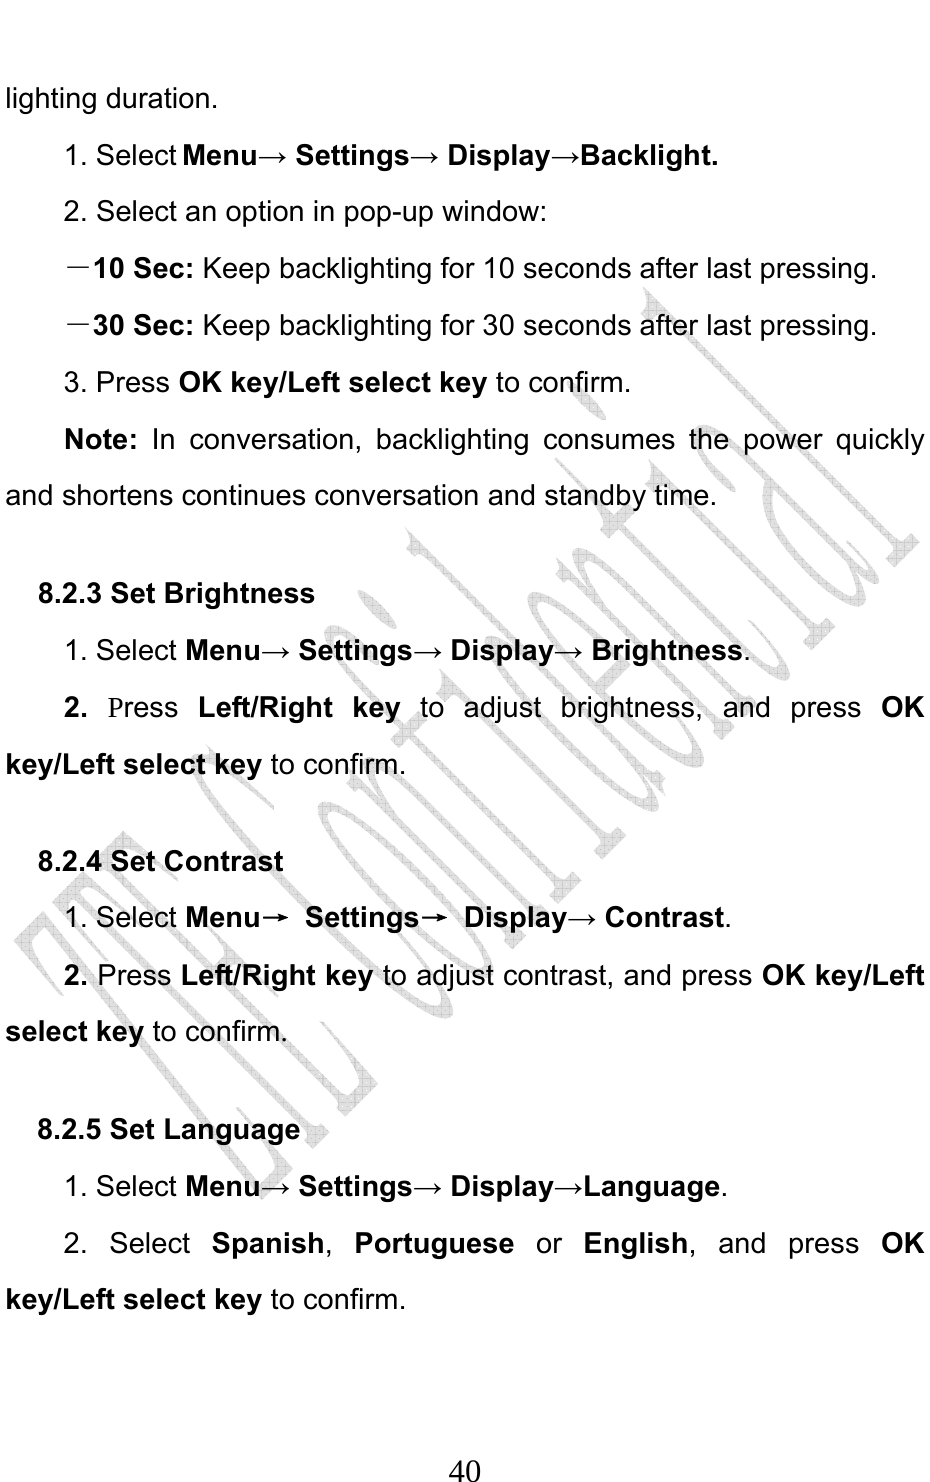                              40lighting duration. 1. Select Menu→ Settings→ Display→Backlight. 2. Select an option in pop-up window: －10 Sec: Keep backlighting for 10 seconds after last pressing. －30 Sec: Keep backlighting for 30 seconds after last pressing. 3. Press OK key/Left select key to confirm. Note:  In conversation, backlighting consumes the power quickly and shortens continues conversation and standby time. 8.2.3 Set Brightness   1. Select Menu→ Settings→ Display→ Brightness. 2.  Press  Left/Right key to adjust brightness, and press OK key/Left select key to confirm. 8.2.4 Set Contrast 1. Select Menu→ Settings→ Display→ Contrast. 2. Press Left/Right key to adjust contrast, and press OK key/Left select key to confirm. 8.2.5 Set Language   1. Select Menu→ Settings→ Display→Language. 2. Select Spanish,  Portuguese or English, and press OK key/Left select key to confirm.   